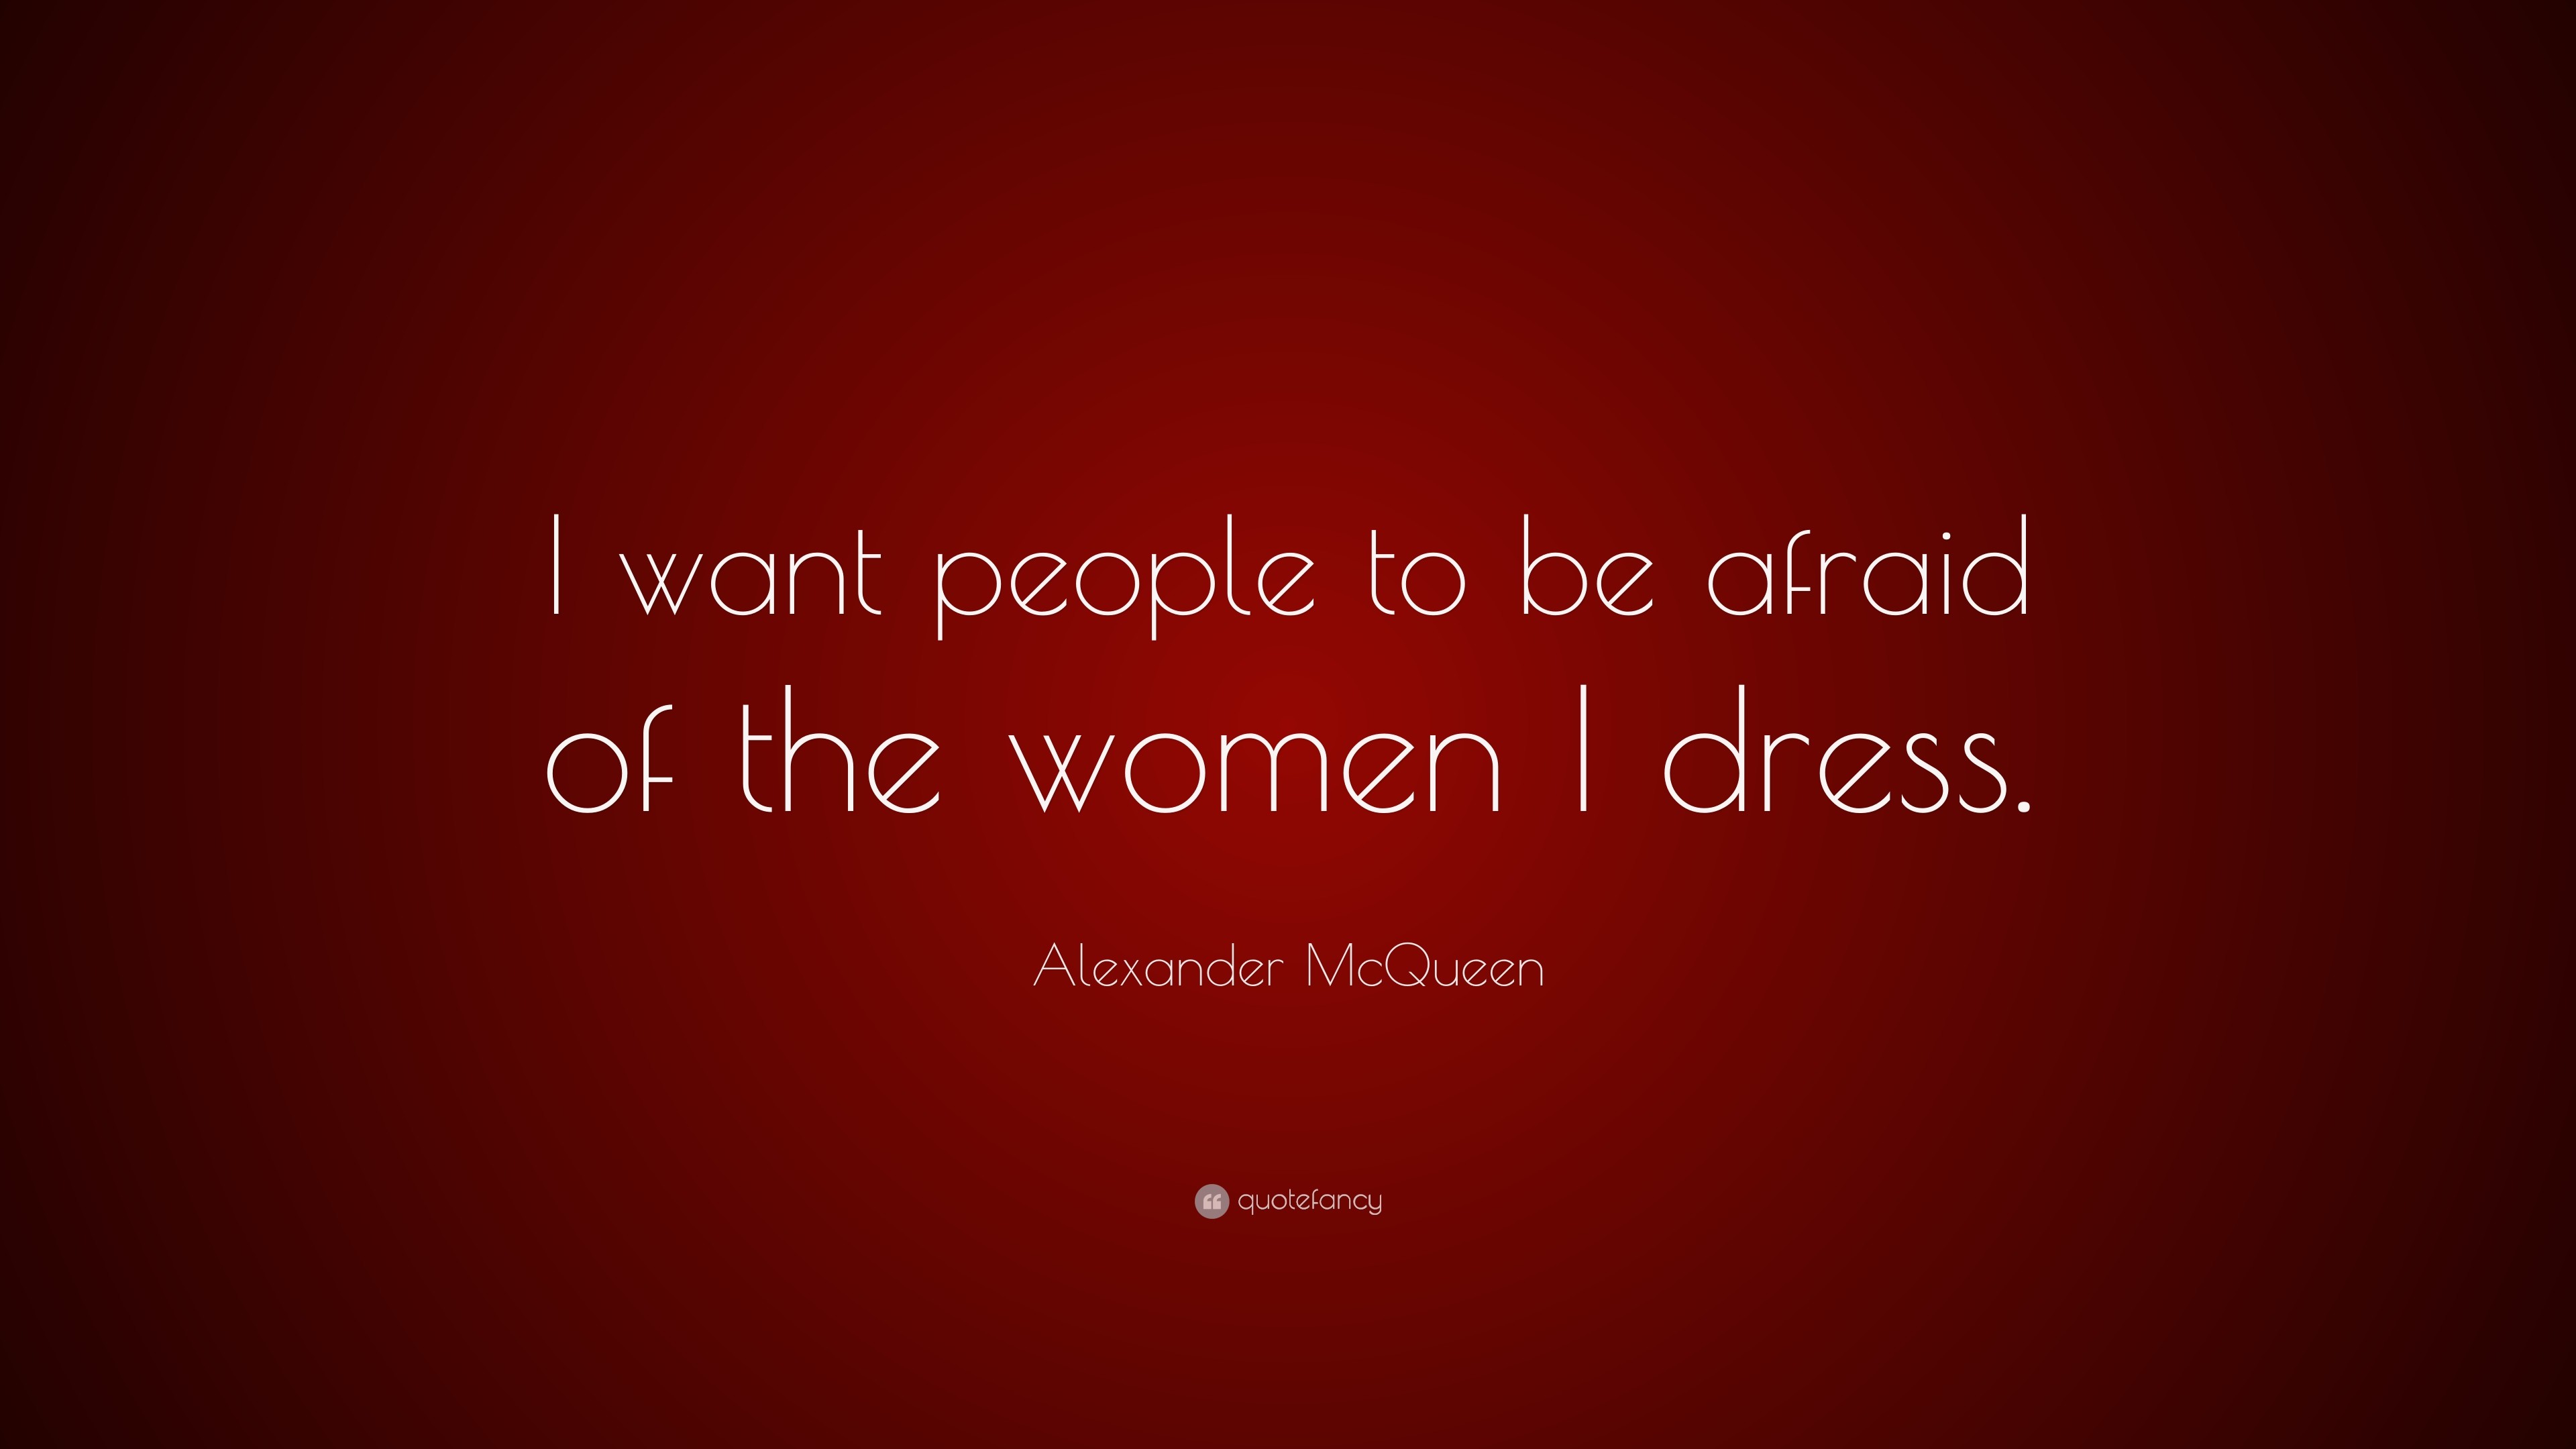 3840x2160 Alexander McQueen Quote: “I want people to be afraid of the women I dress